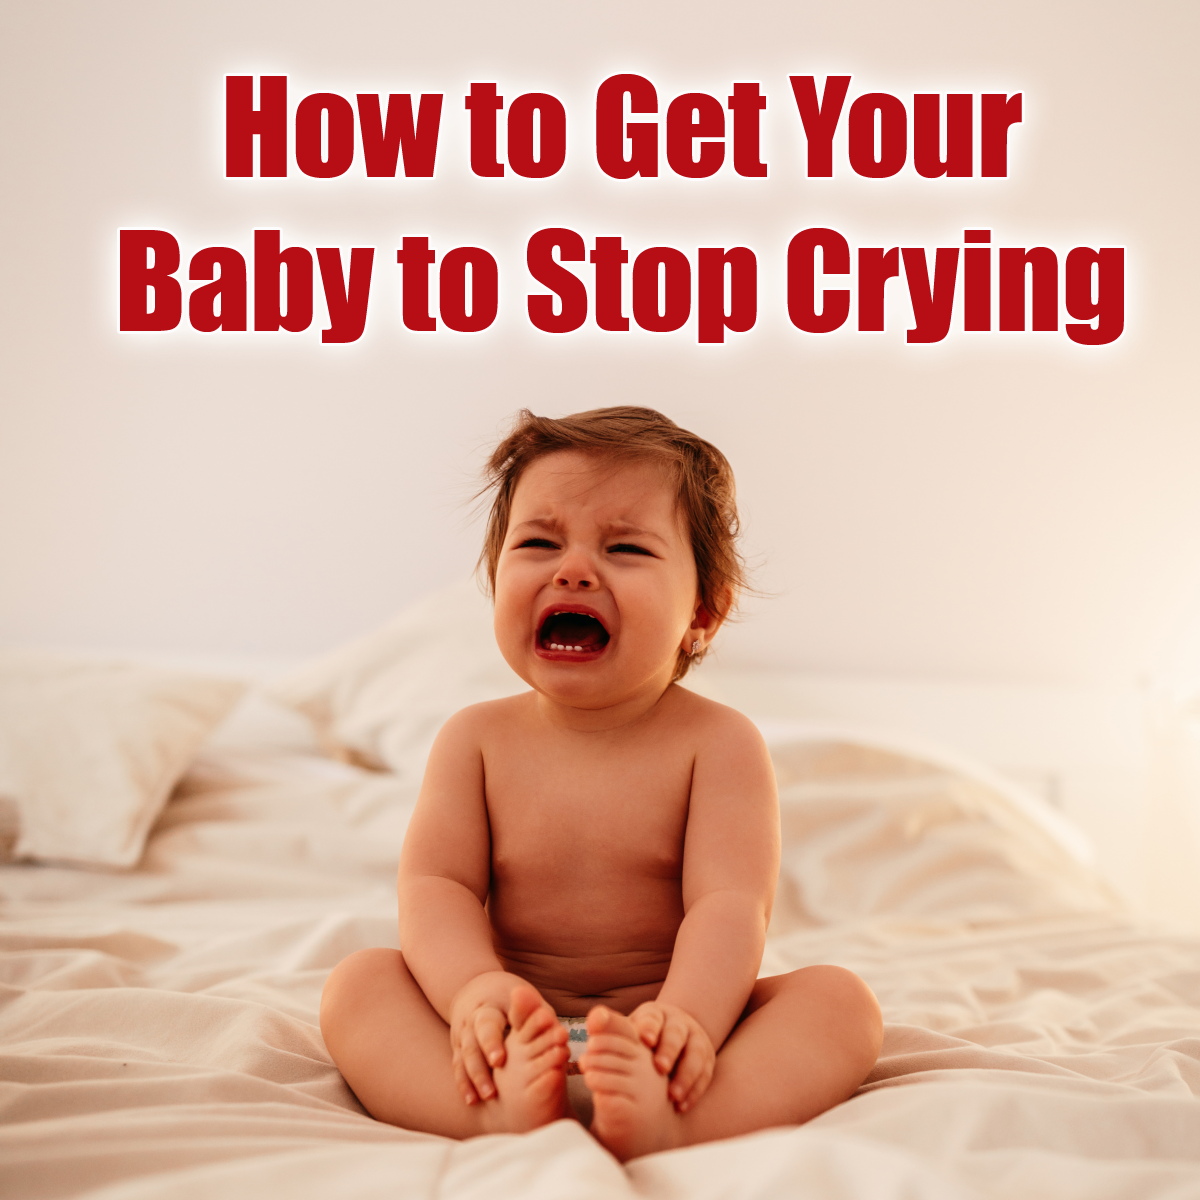 How to get your baby to stop crying